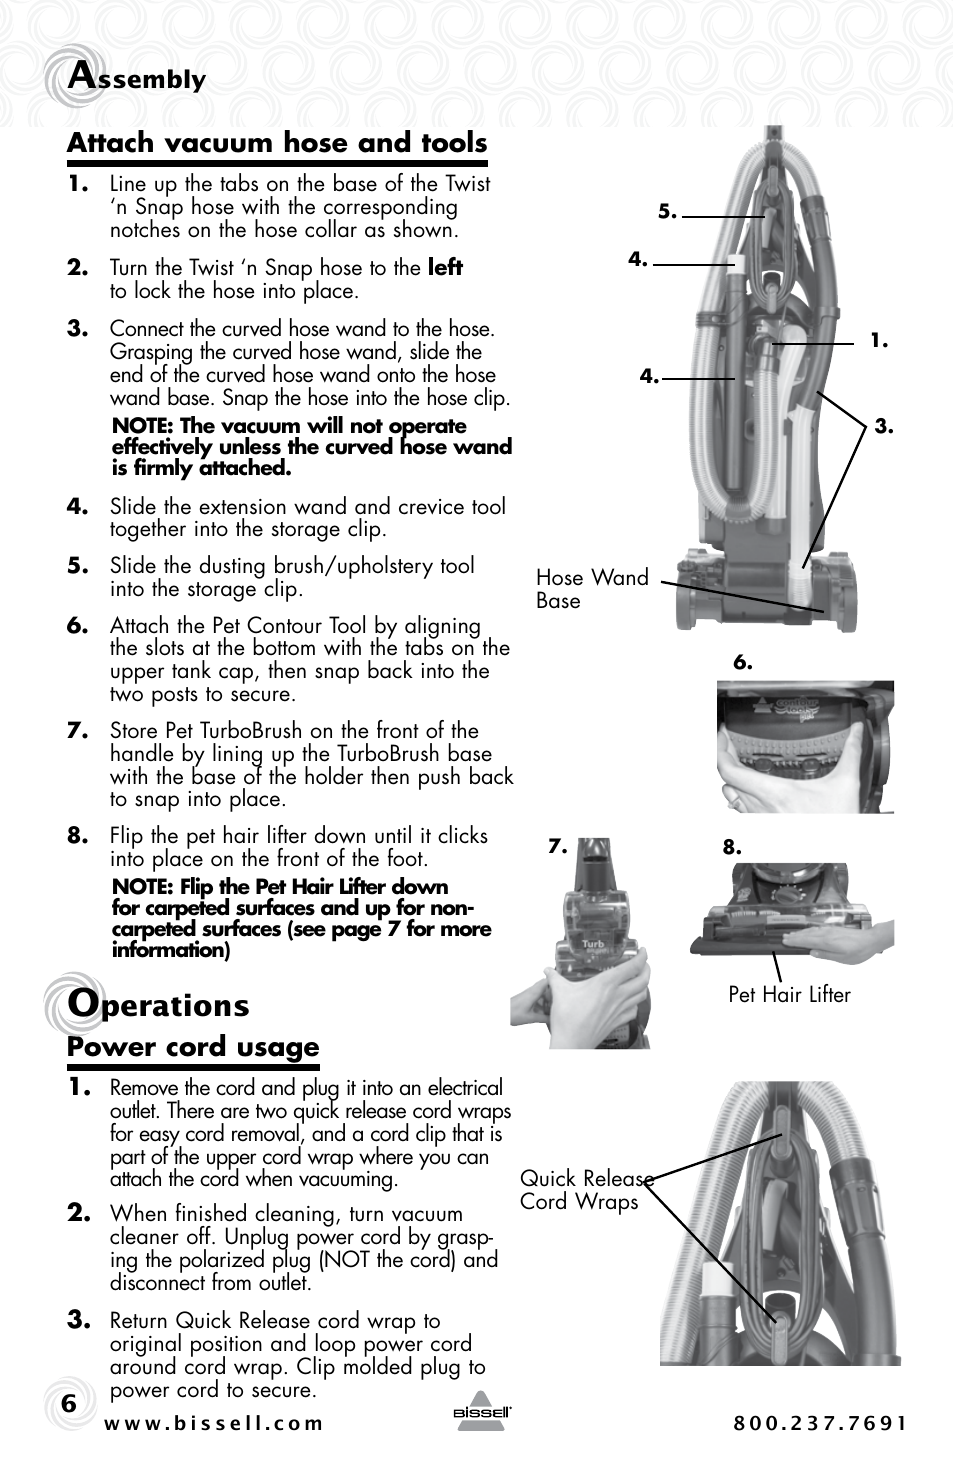 Perations, Attach vacuum hose and tools, Power cord usage | Bissell PET HAIR ERASER 3920 User Manual | Page 6 / 20